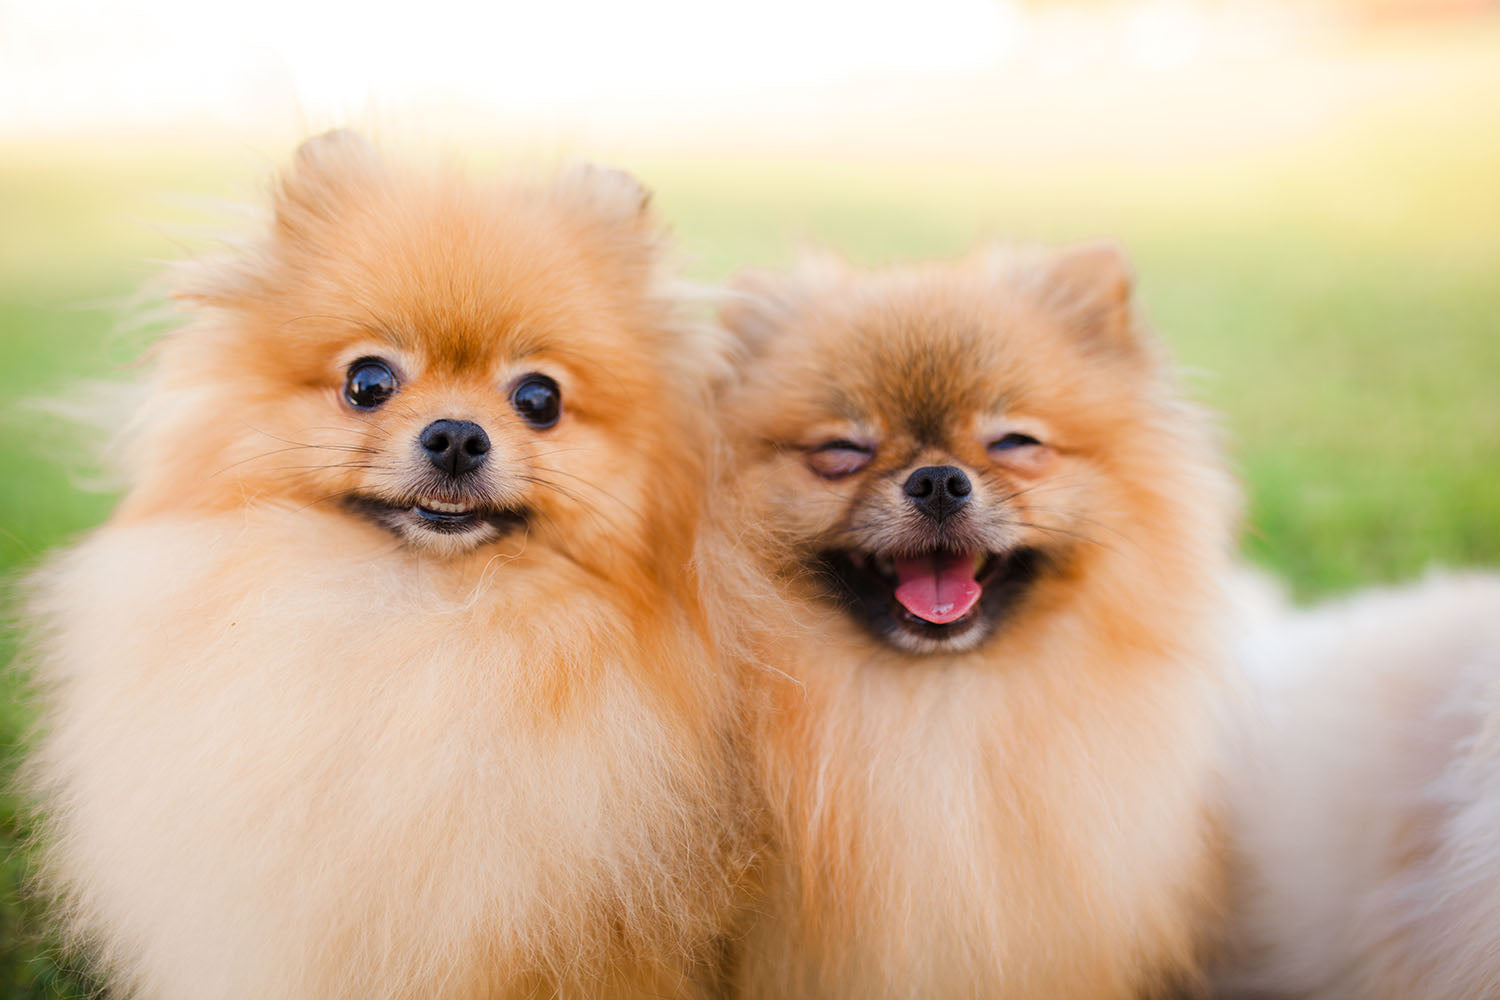 Two Pomeranians sitting outside on a sunny day One smiling big with squinted eyes